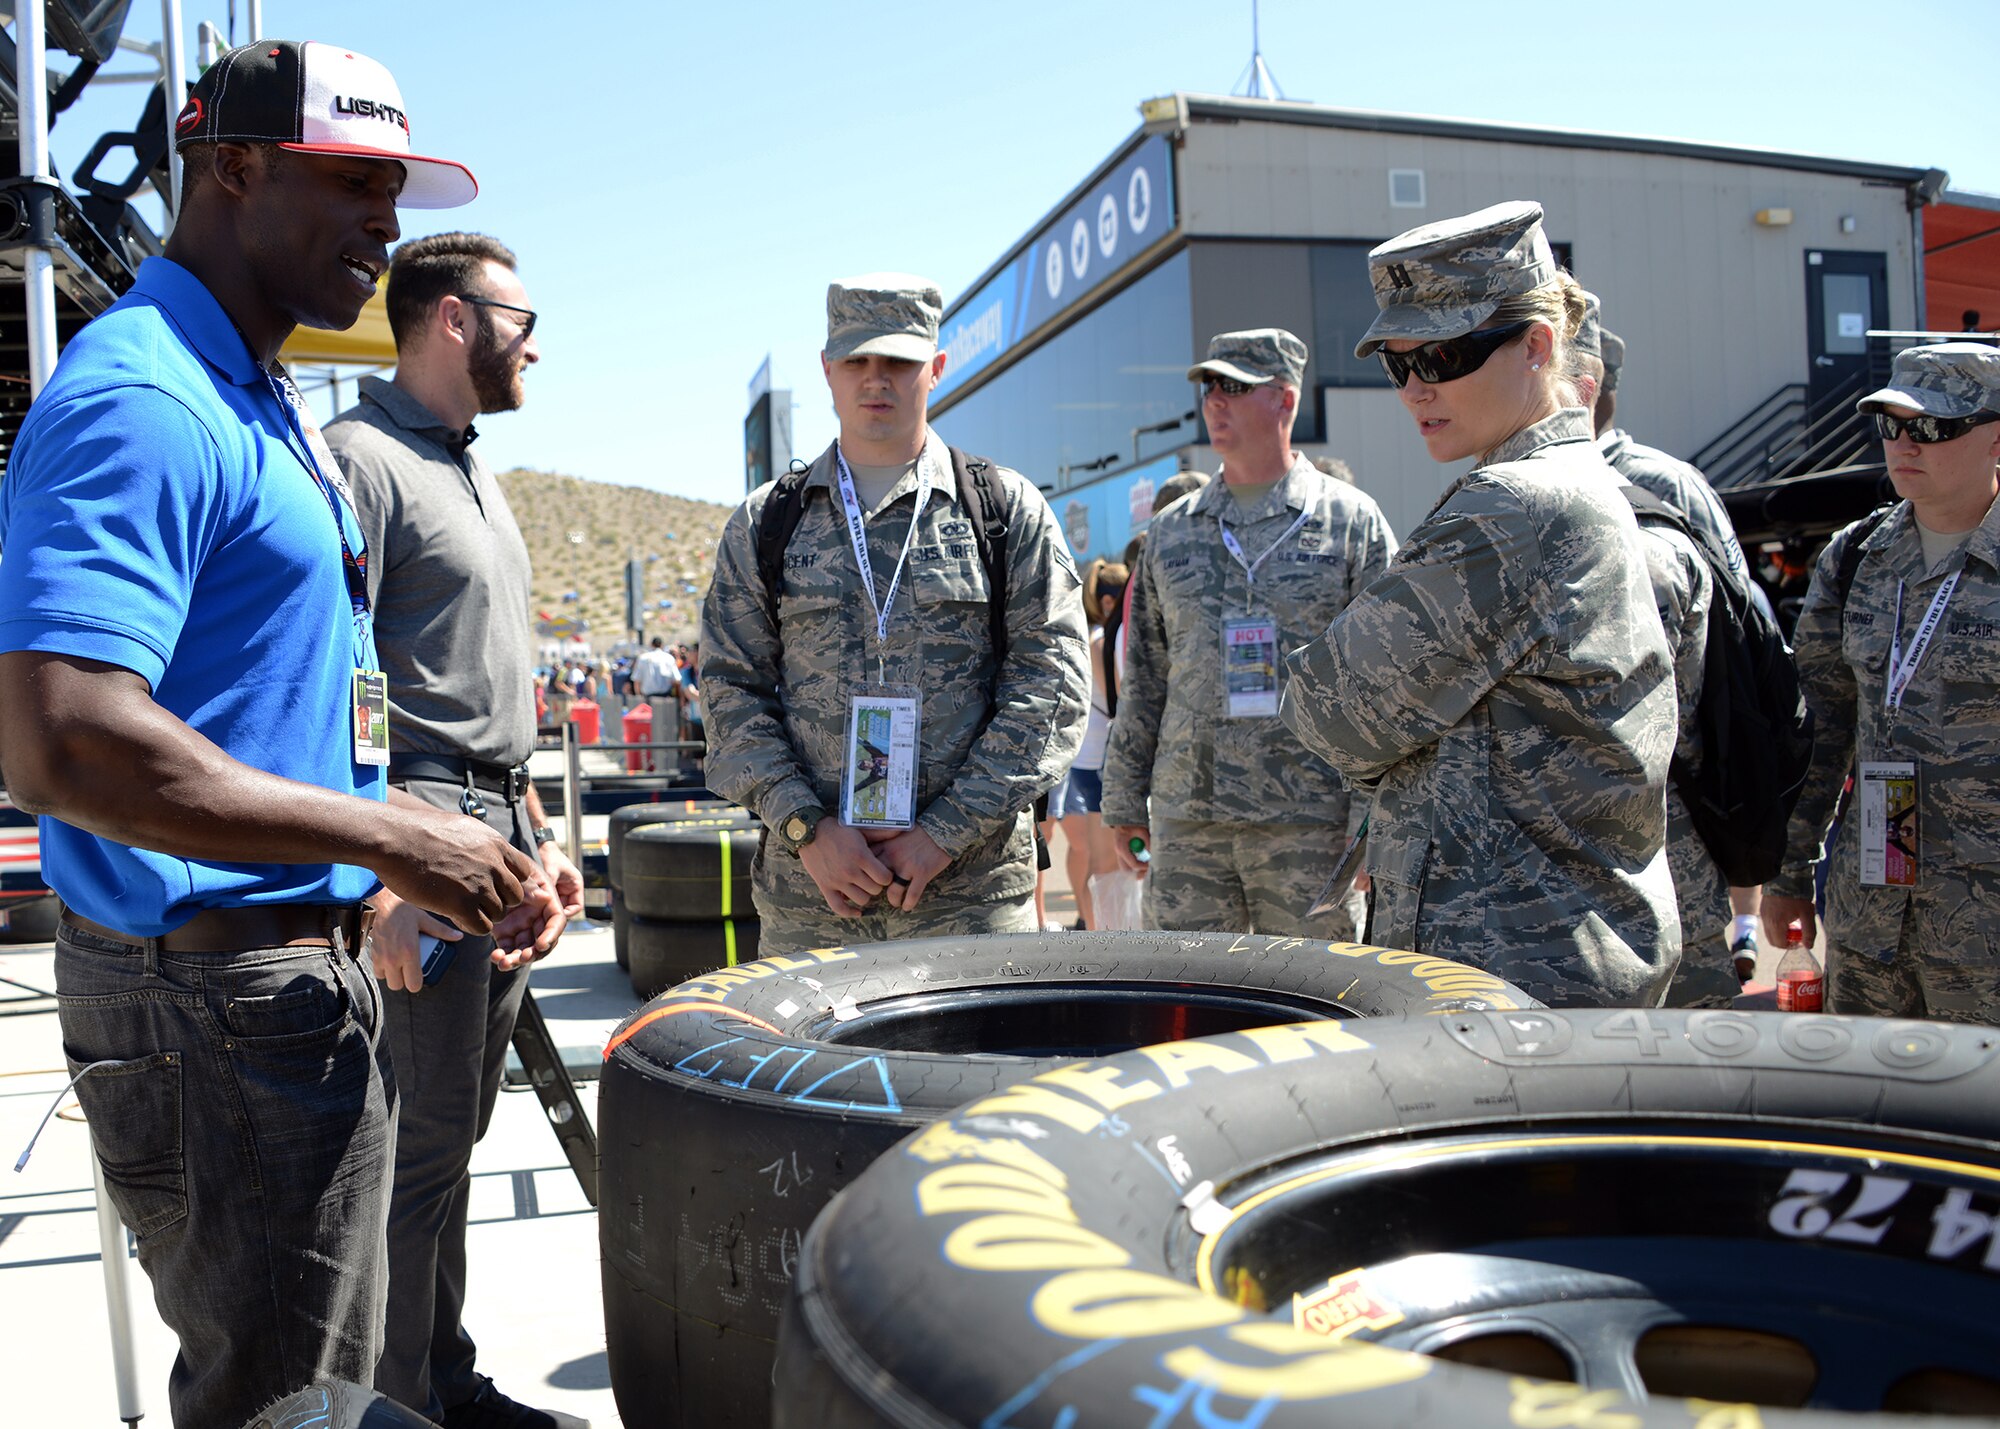 Jesse Iwuji, NASCAR driver, shows Luke Airmen tires that are used for the race during their visit through the garages at the Camping World 500 Mar. 19, 2017, at the Phoenix International Raceway, Avondale, Ariz. (U.S. Air Force photo by Airman First Class Alexander Cook)  